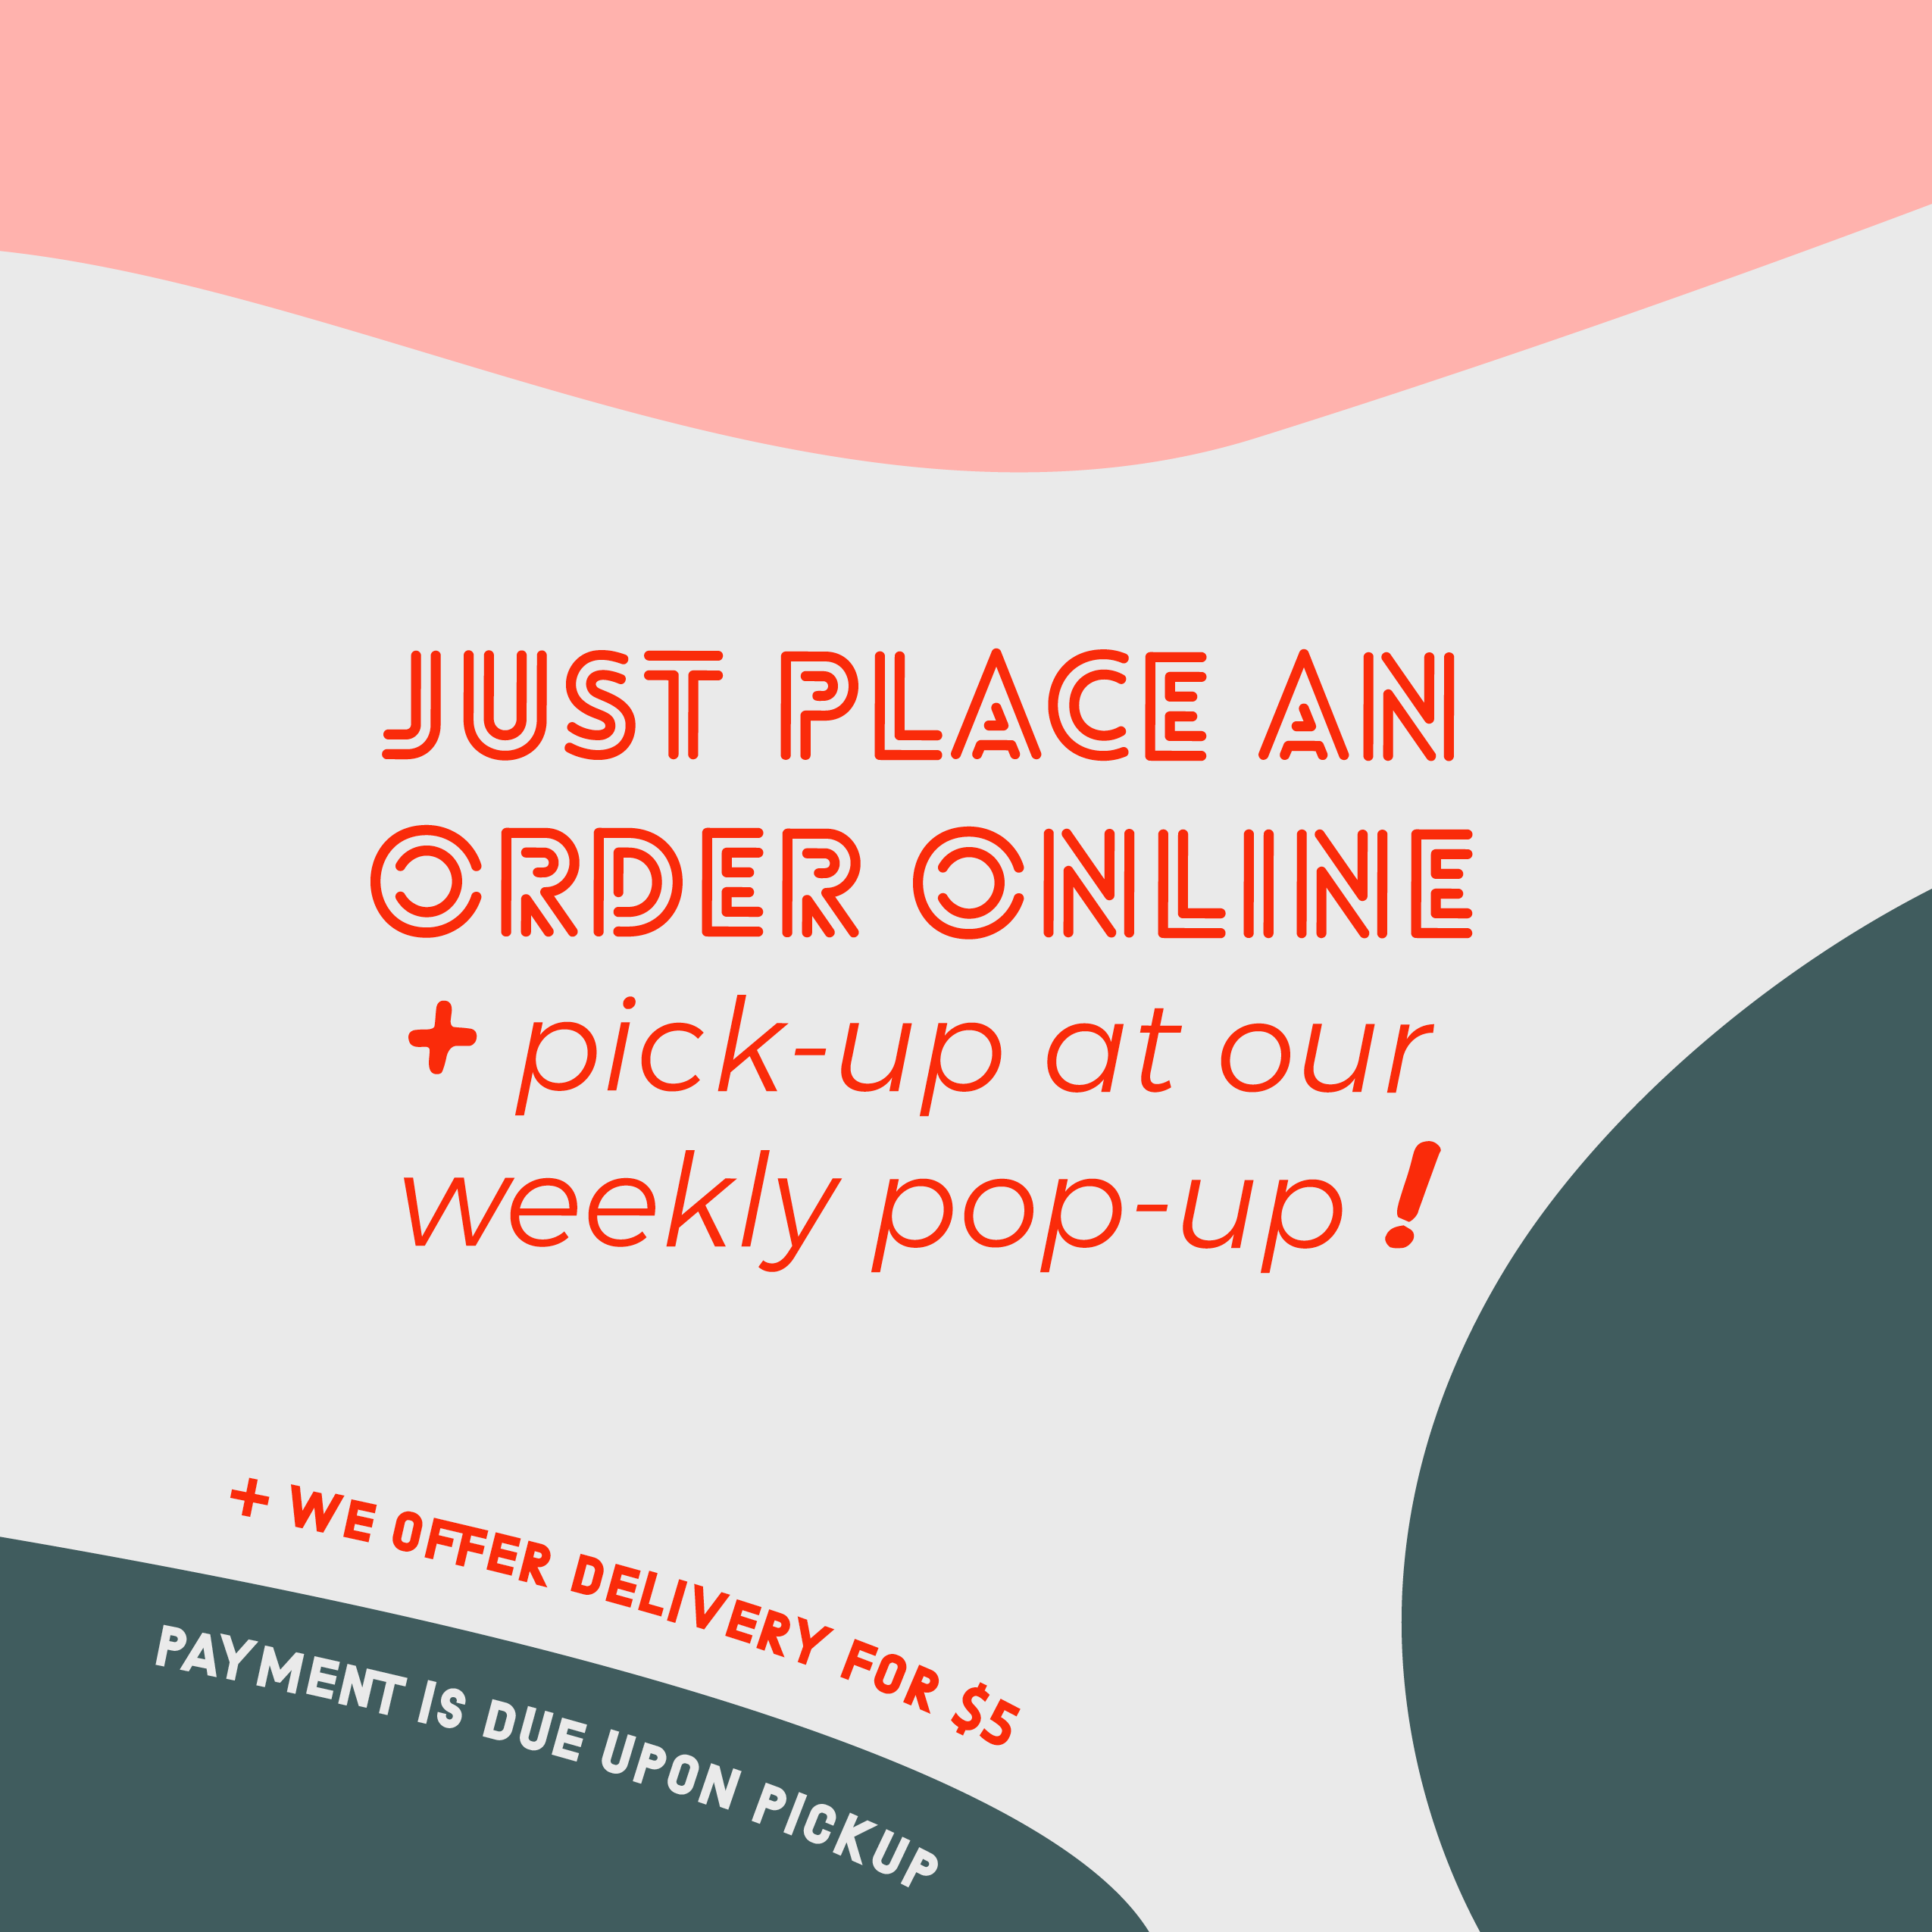 Place order online for pickup or delivery